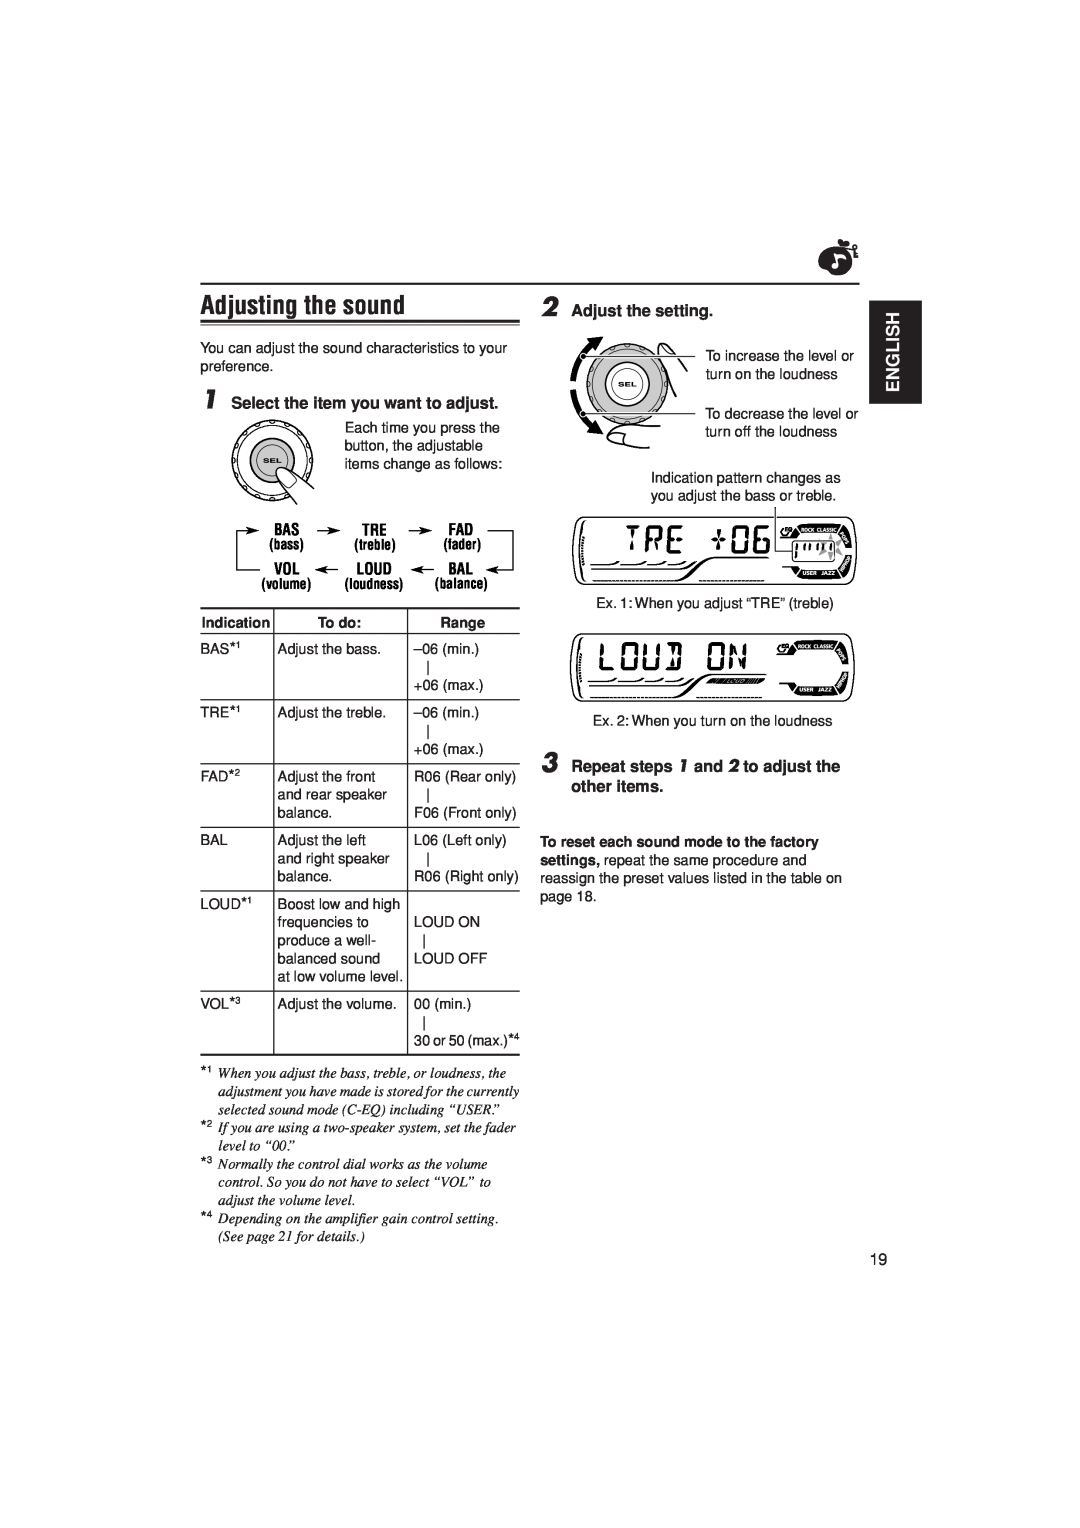 JVC KD-G305 manual Adjusting the sound, English, Adjust the setting, Select the item you want to adjust, Indication, To do 